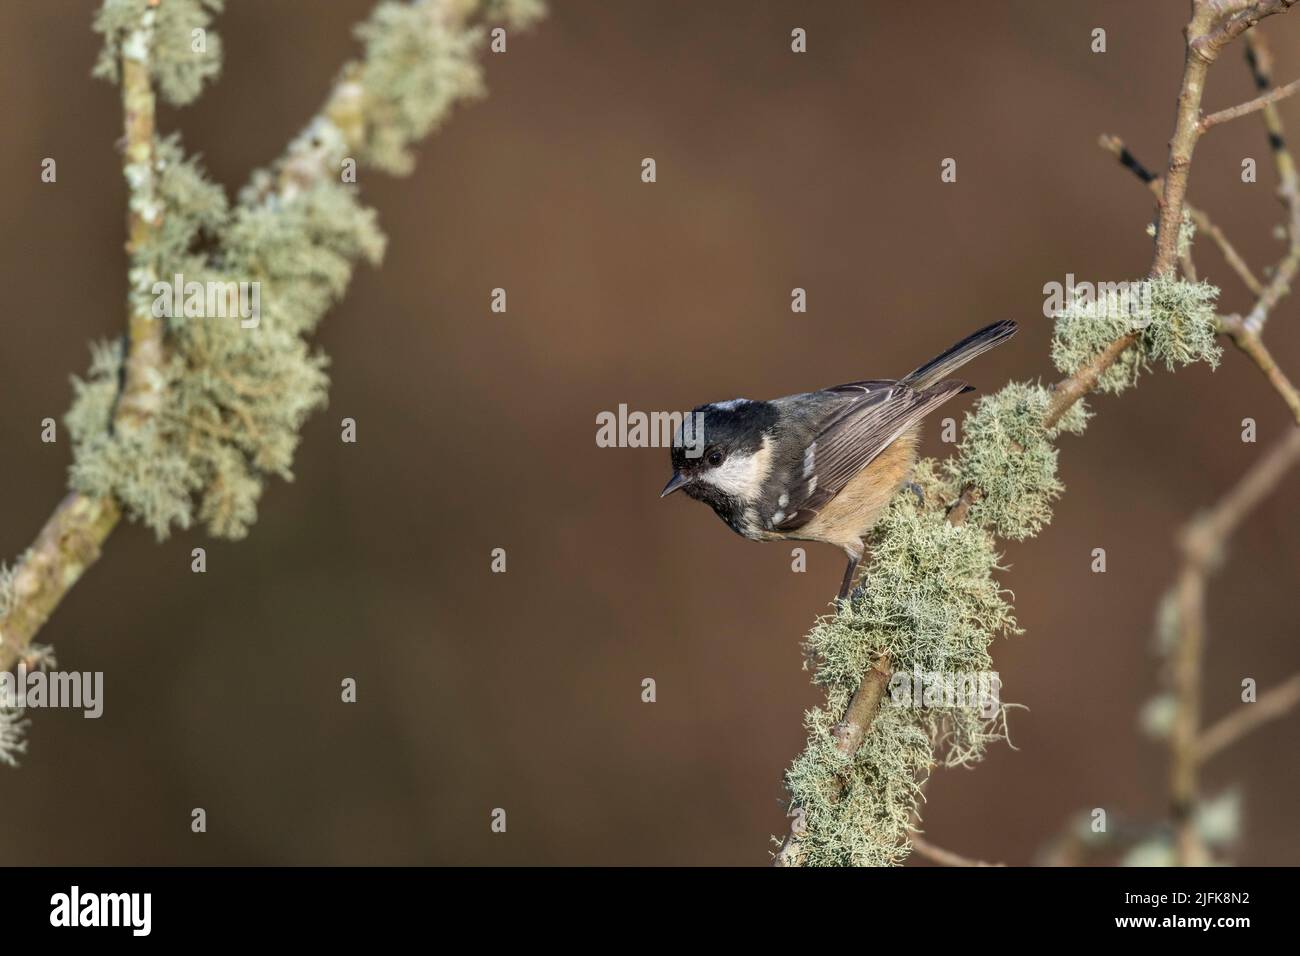 Coal Tit; Periparus ater; on Lichen Covered Twig; UK Foto Stock